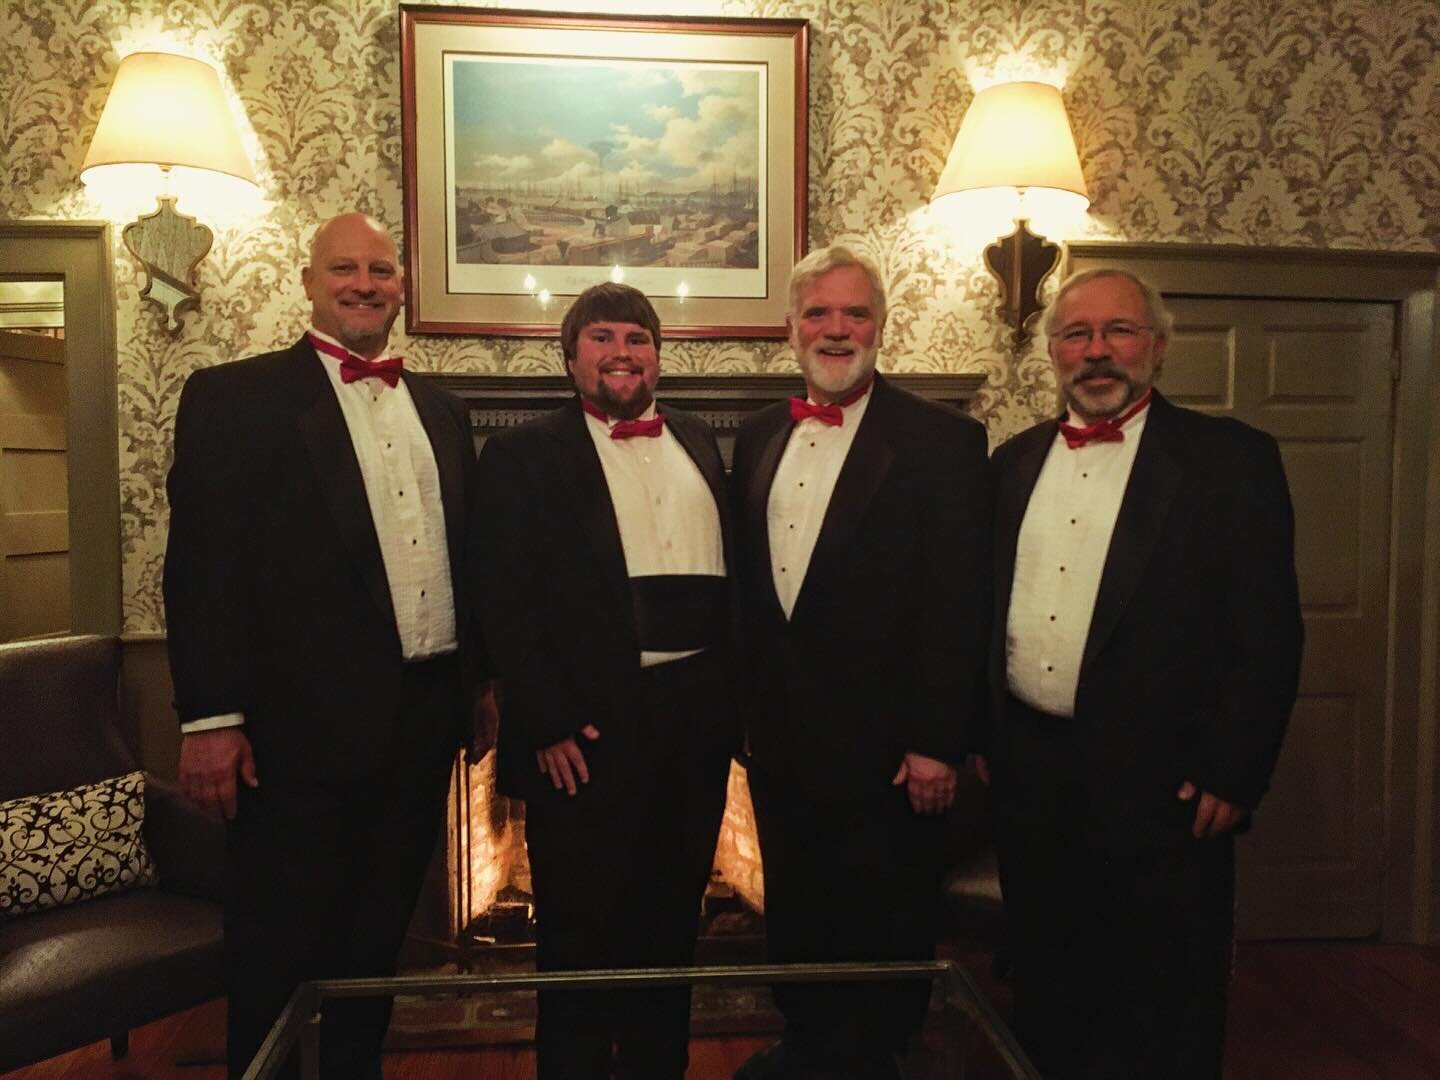 Thanks to our Valentines Day quartets for serenading diners @ruthschris and @salisbury_country_club!  #valentines #sweethearts #eveningout 
.
.
.
.
.
.
#singing #voices #sing #singers #chorus #acapella #harmonies #RVA #rvamusic #richmondva #virginian